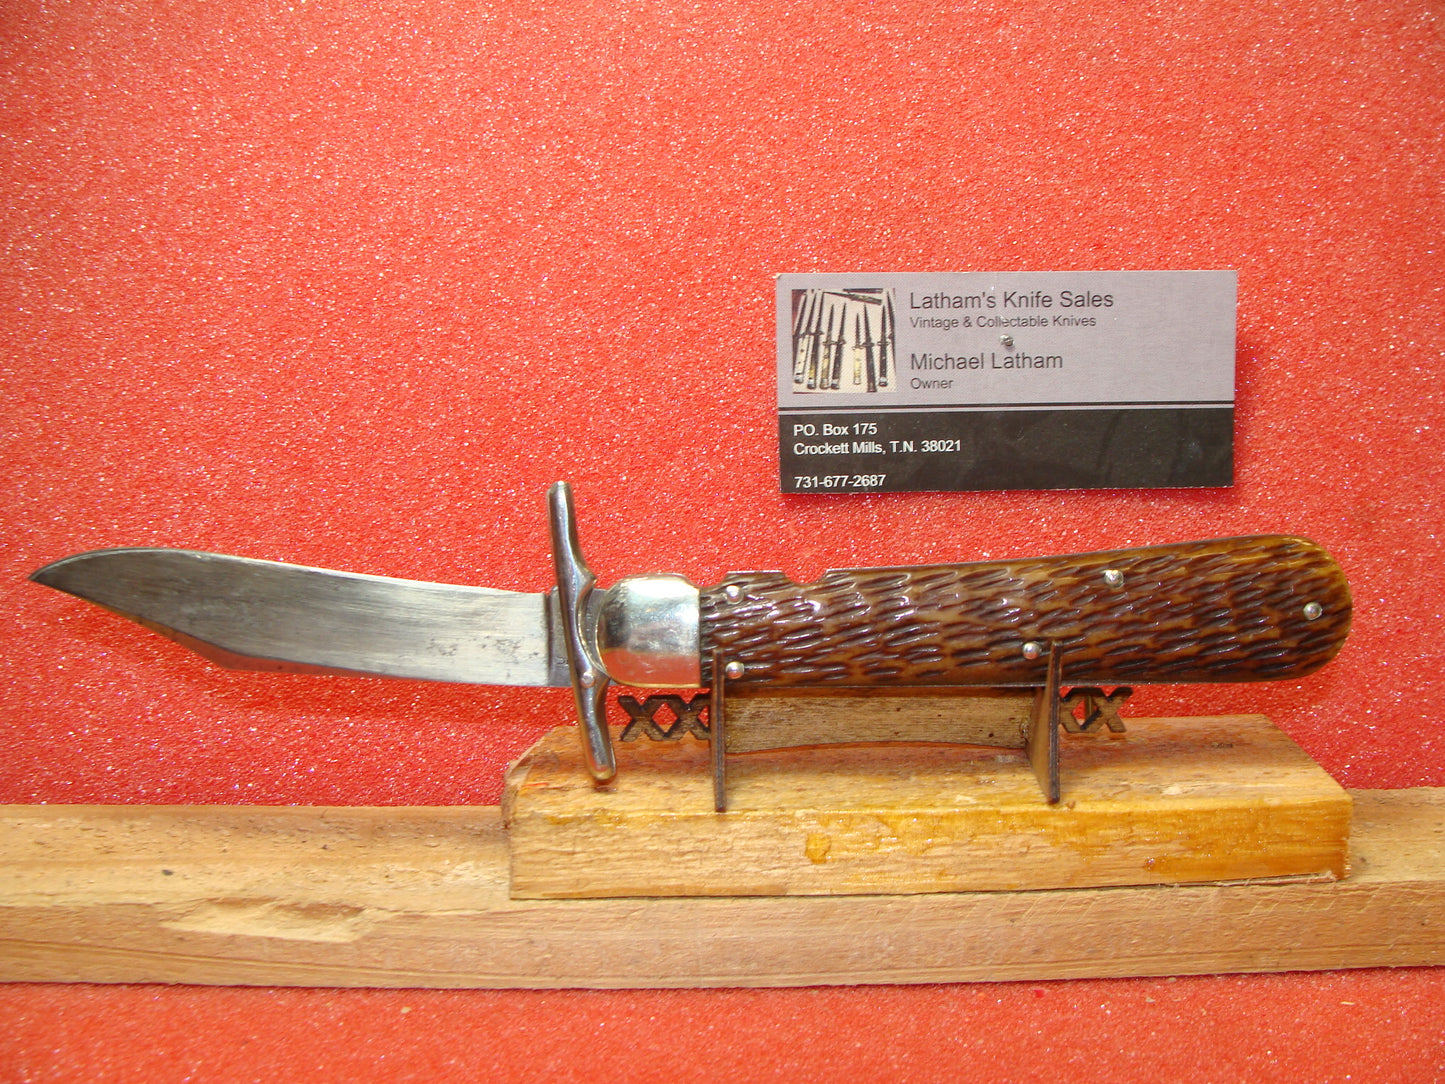 SCHRADE CUT CO. WALDEN NY 1916-46 VINTAGE AMERICAN AUTOMATIC KNIFE 4 7/8" SWING GUARD HUNTER'S PRIDE BROWN JIGGED BONE HANDLES